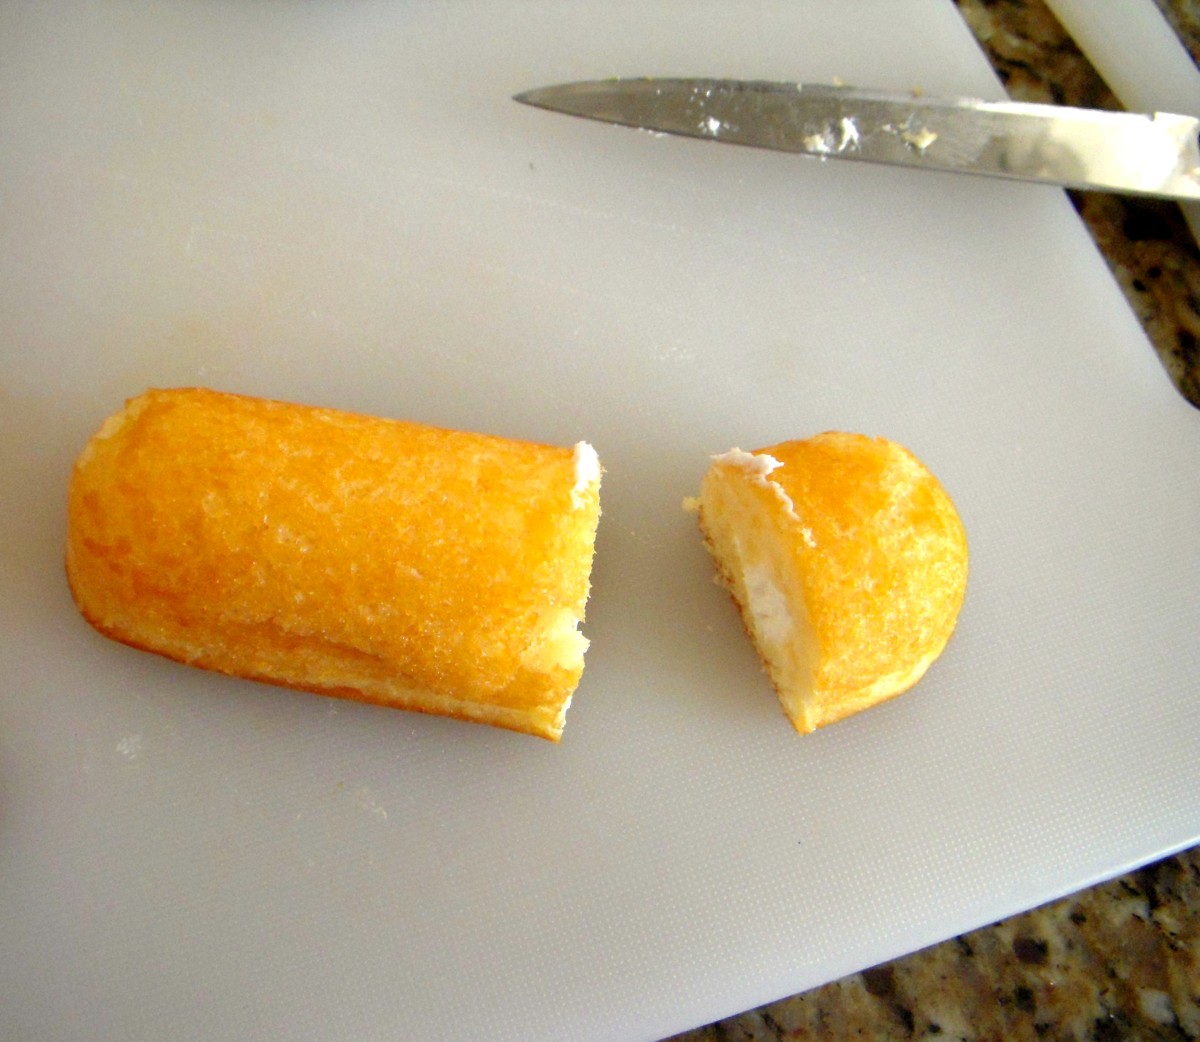 Step 3: Cut approximately 1" from one end of the Twinkie. The larger piece will be used to make the Minion. Eat the smaller piece.